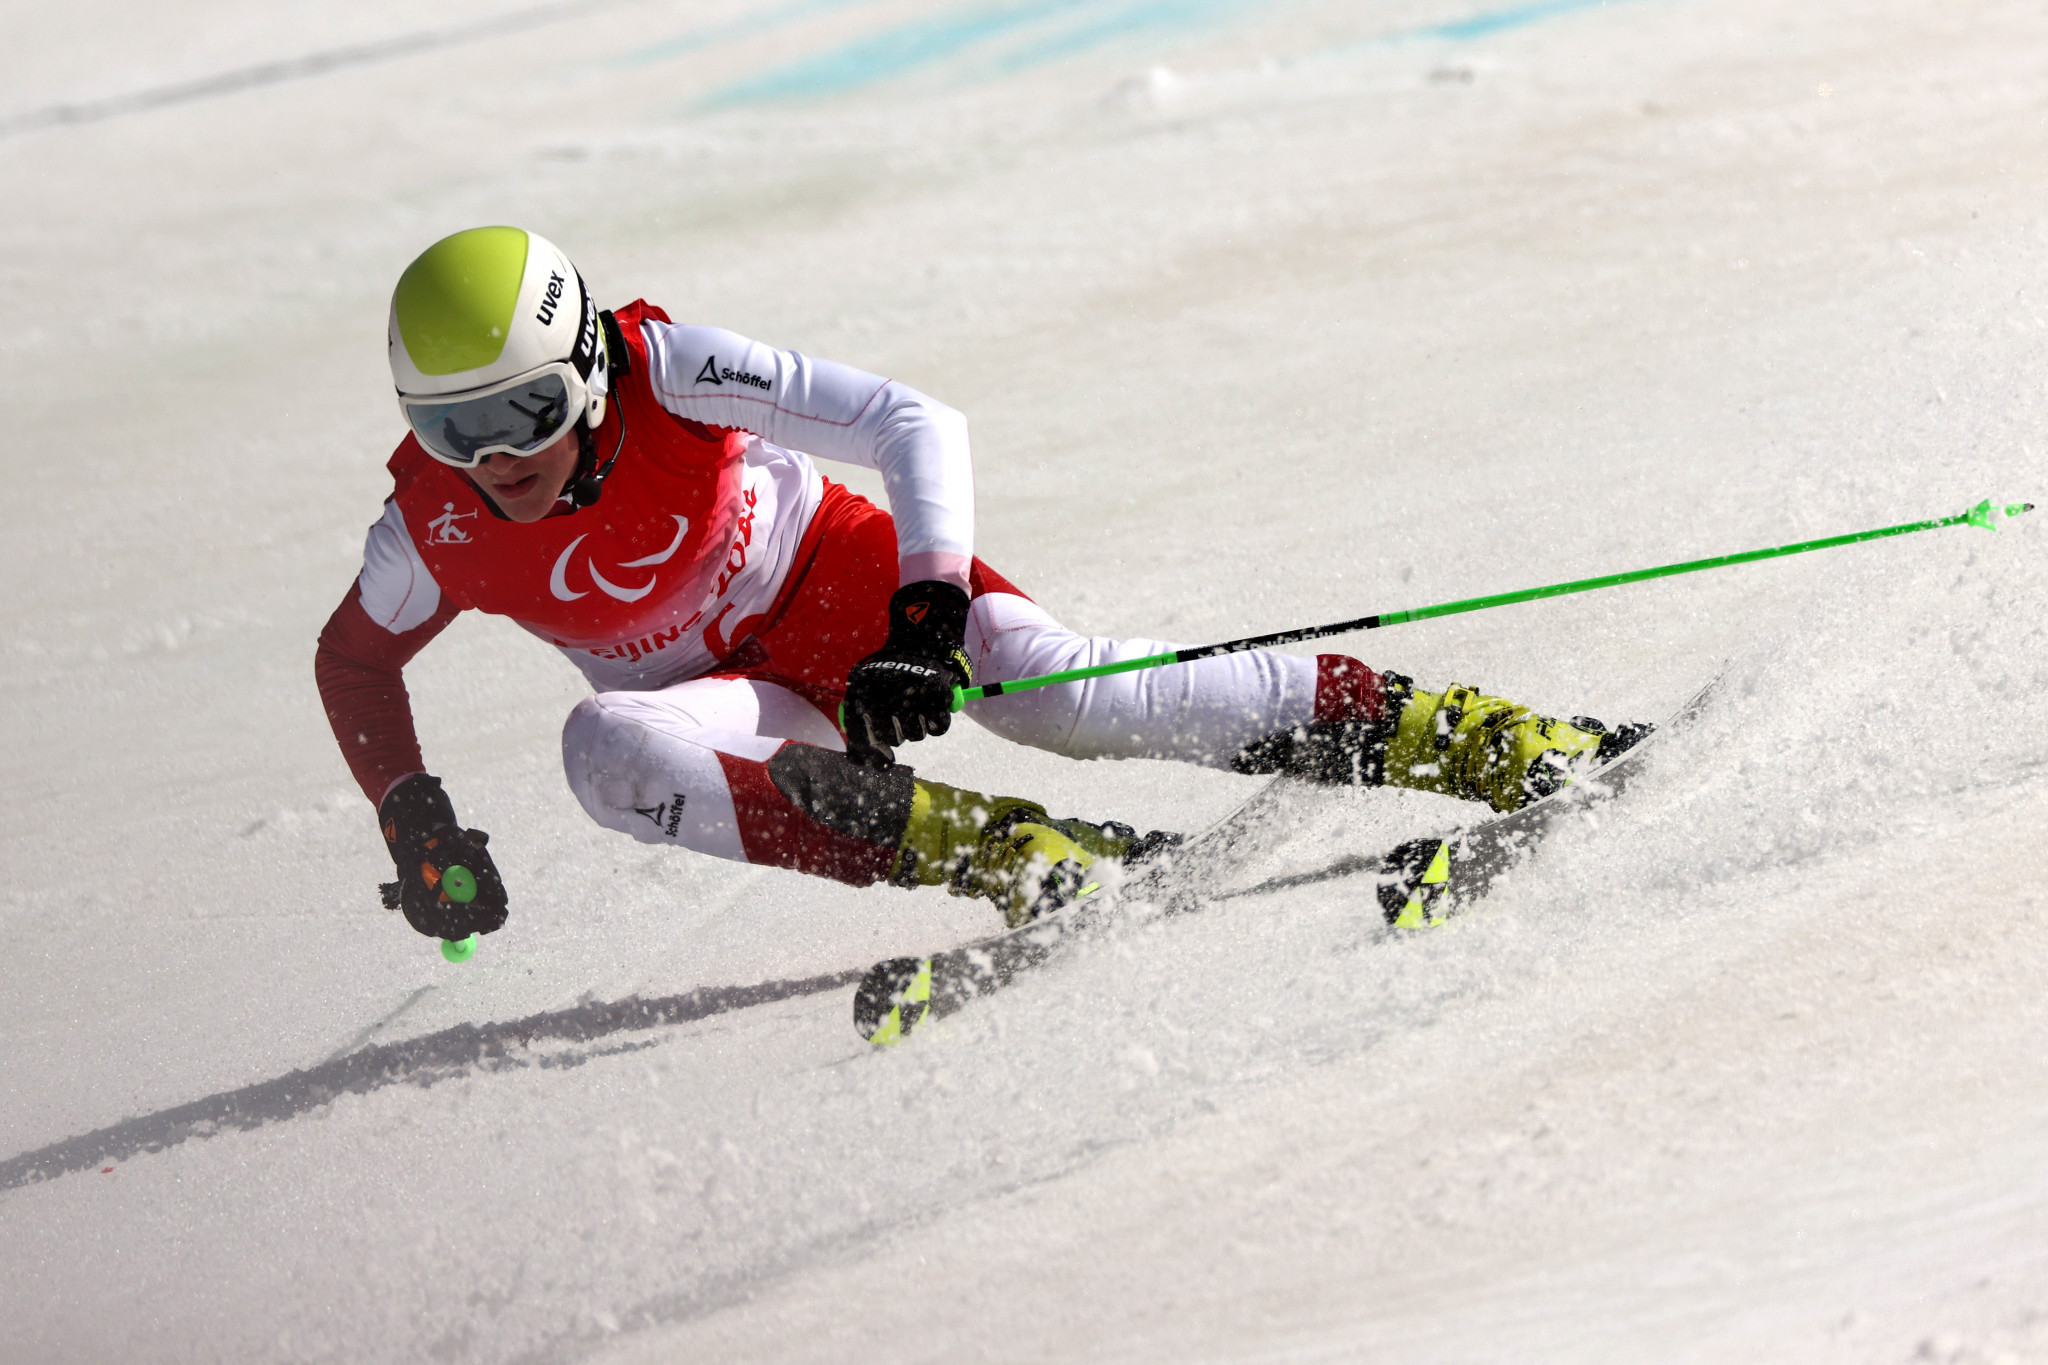 Austria's 16-year-old Johannes Aigner won his second gold of the Paralympics in the men's giant slalom vision impaired event ©Getty Images